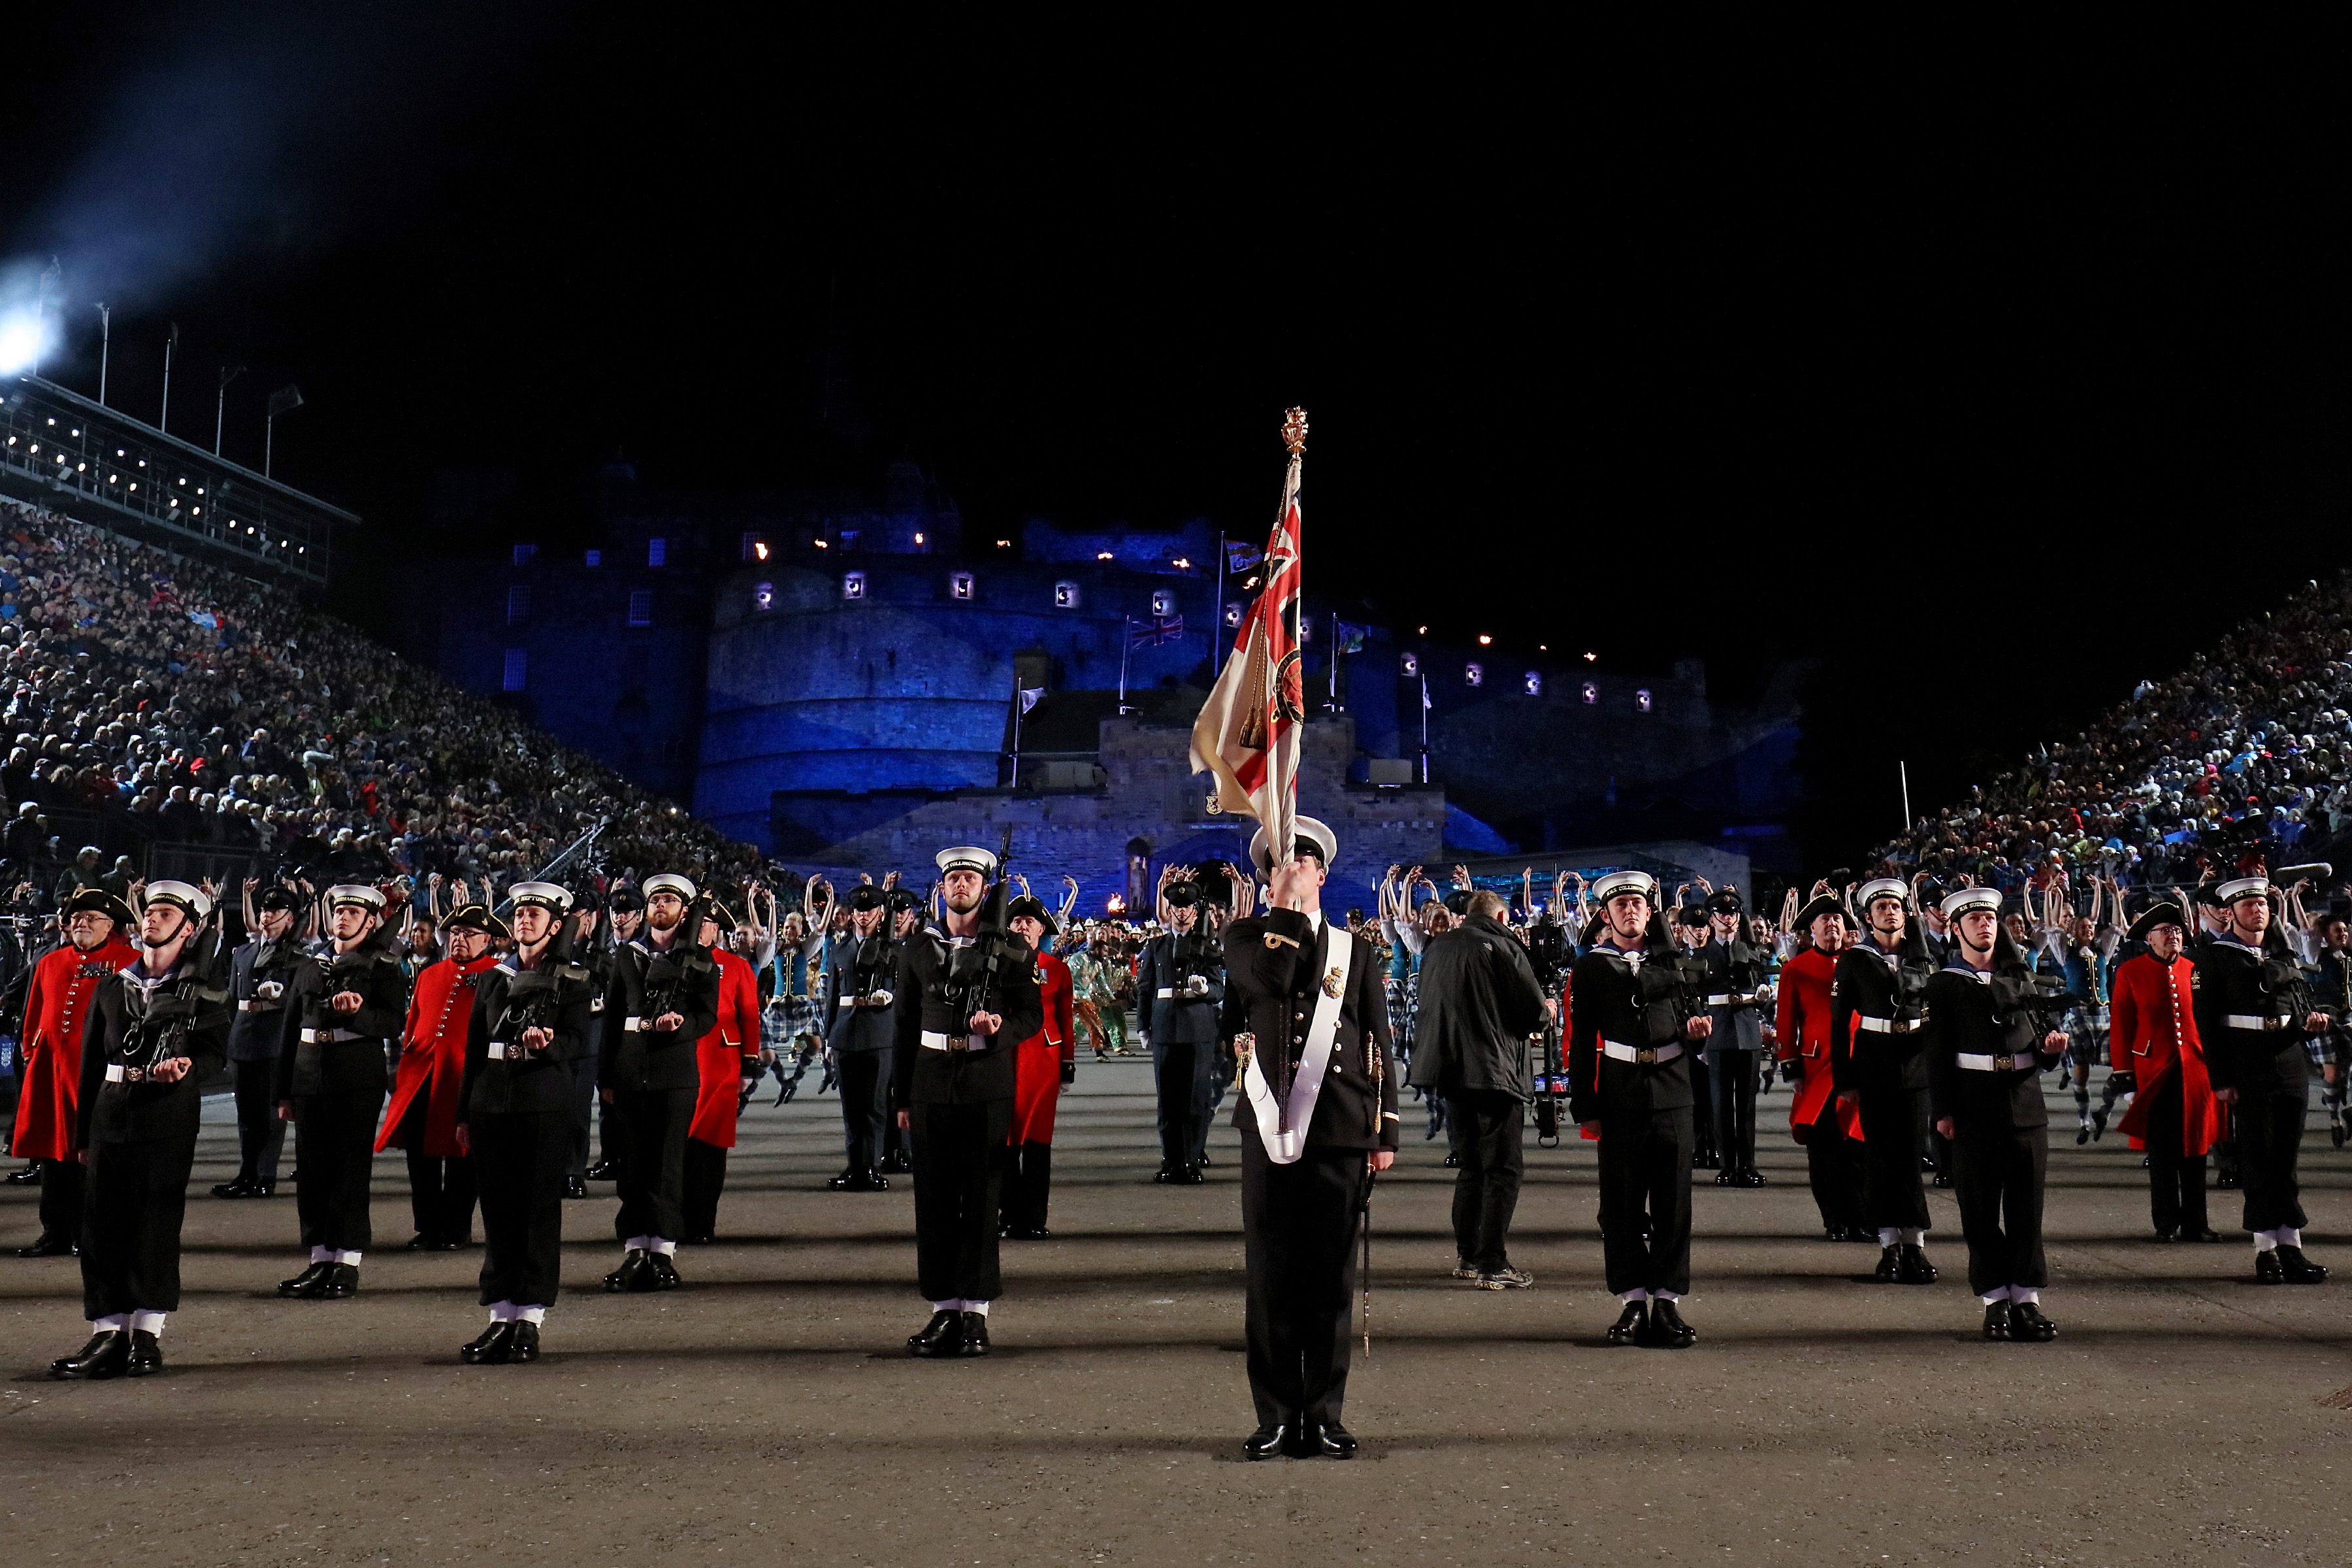 Naval Service personnel in the Royal Edinburgh Military Tattoo